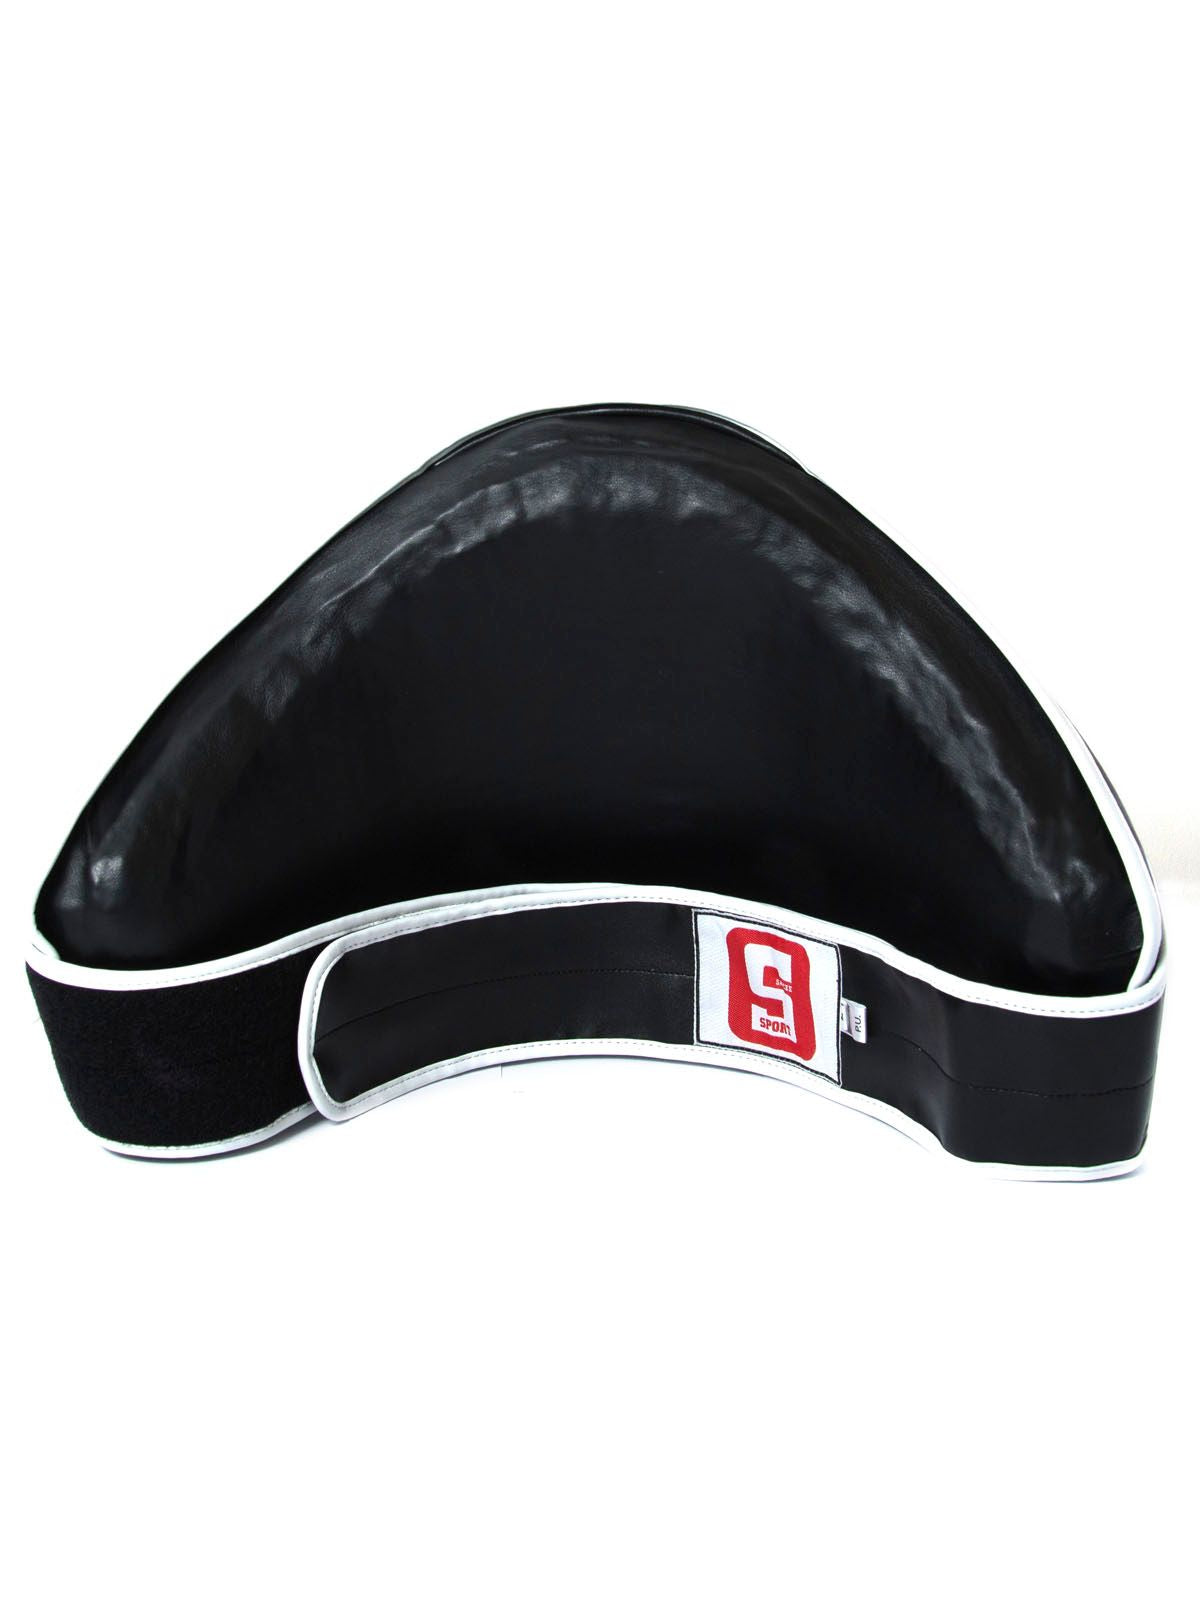 Sandee Sport Synthetic Leather Belly Pad Fight Co